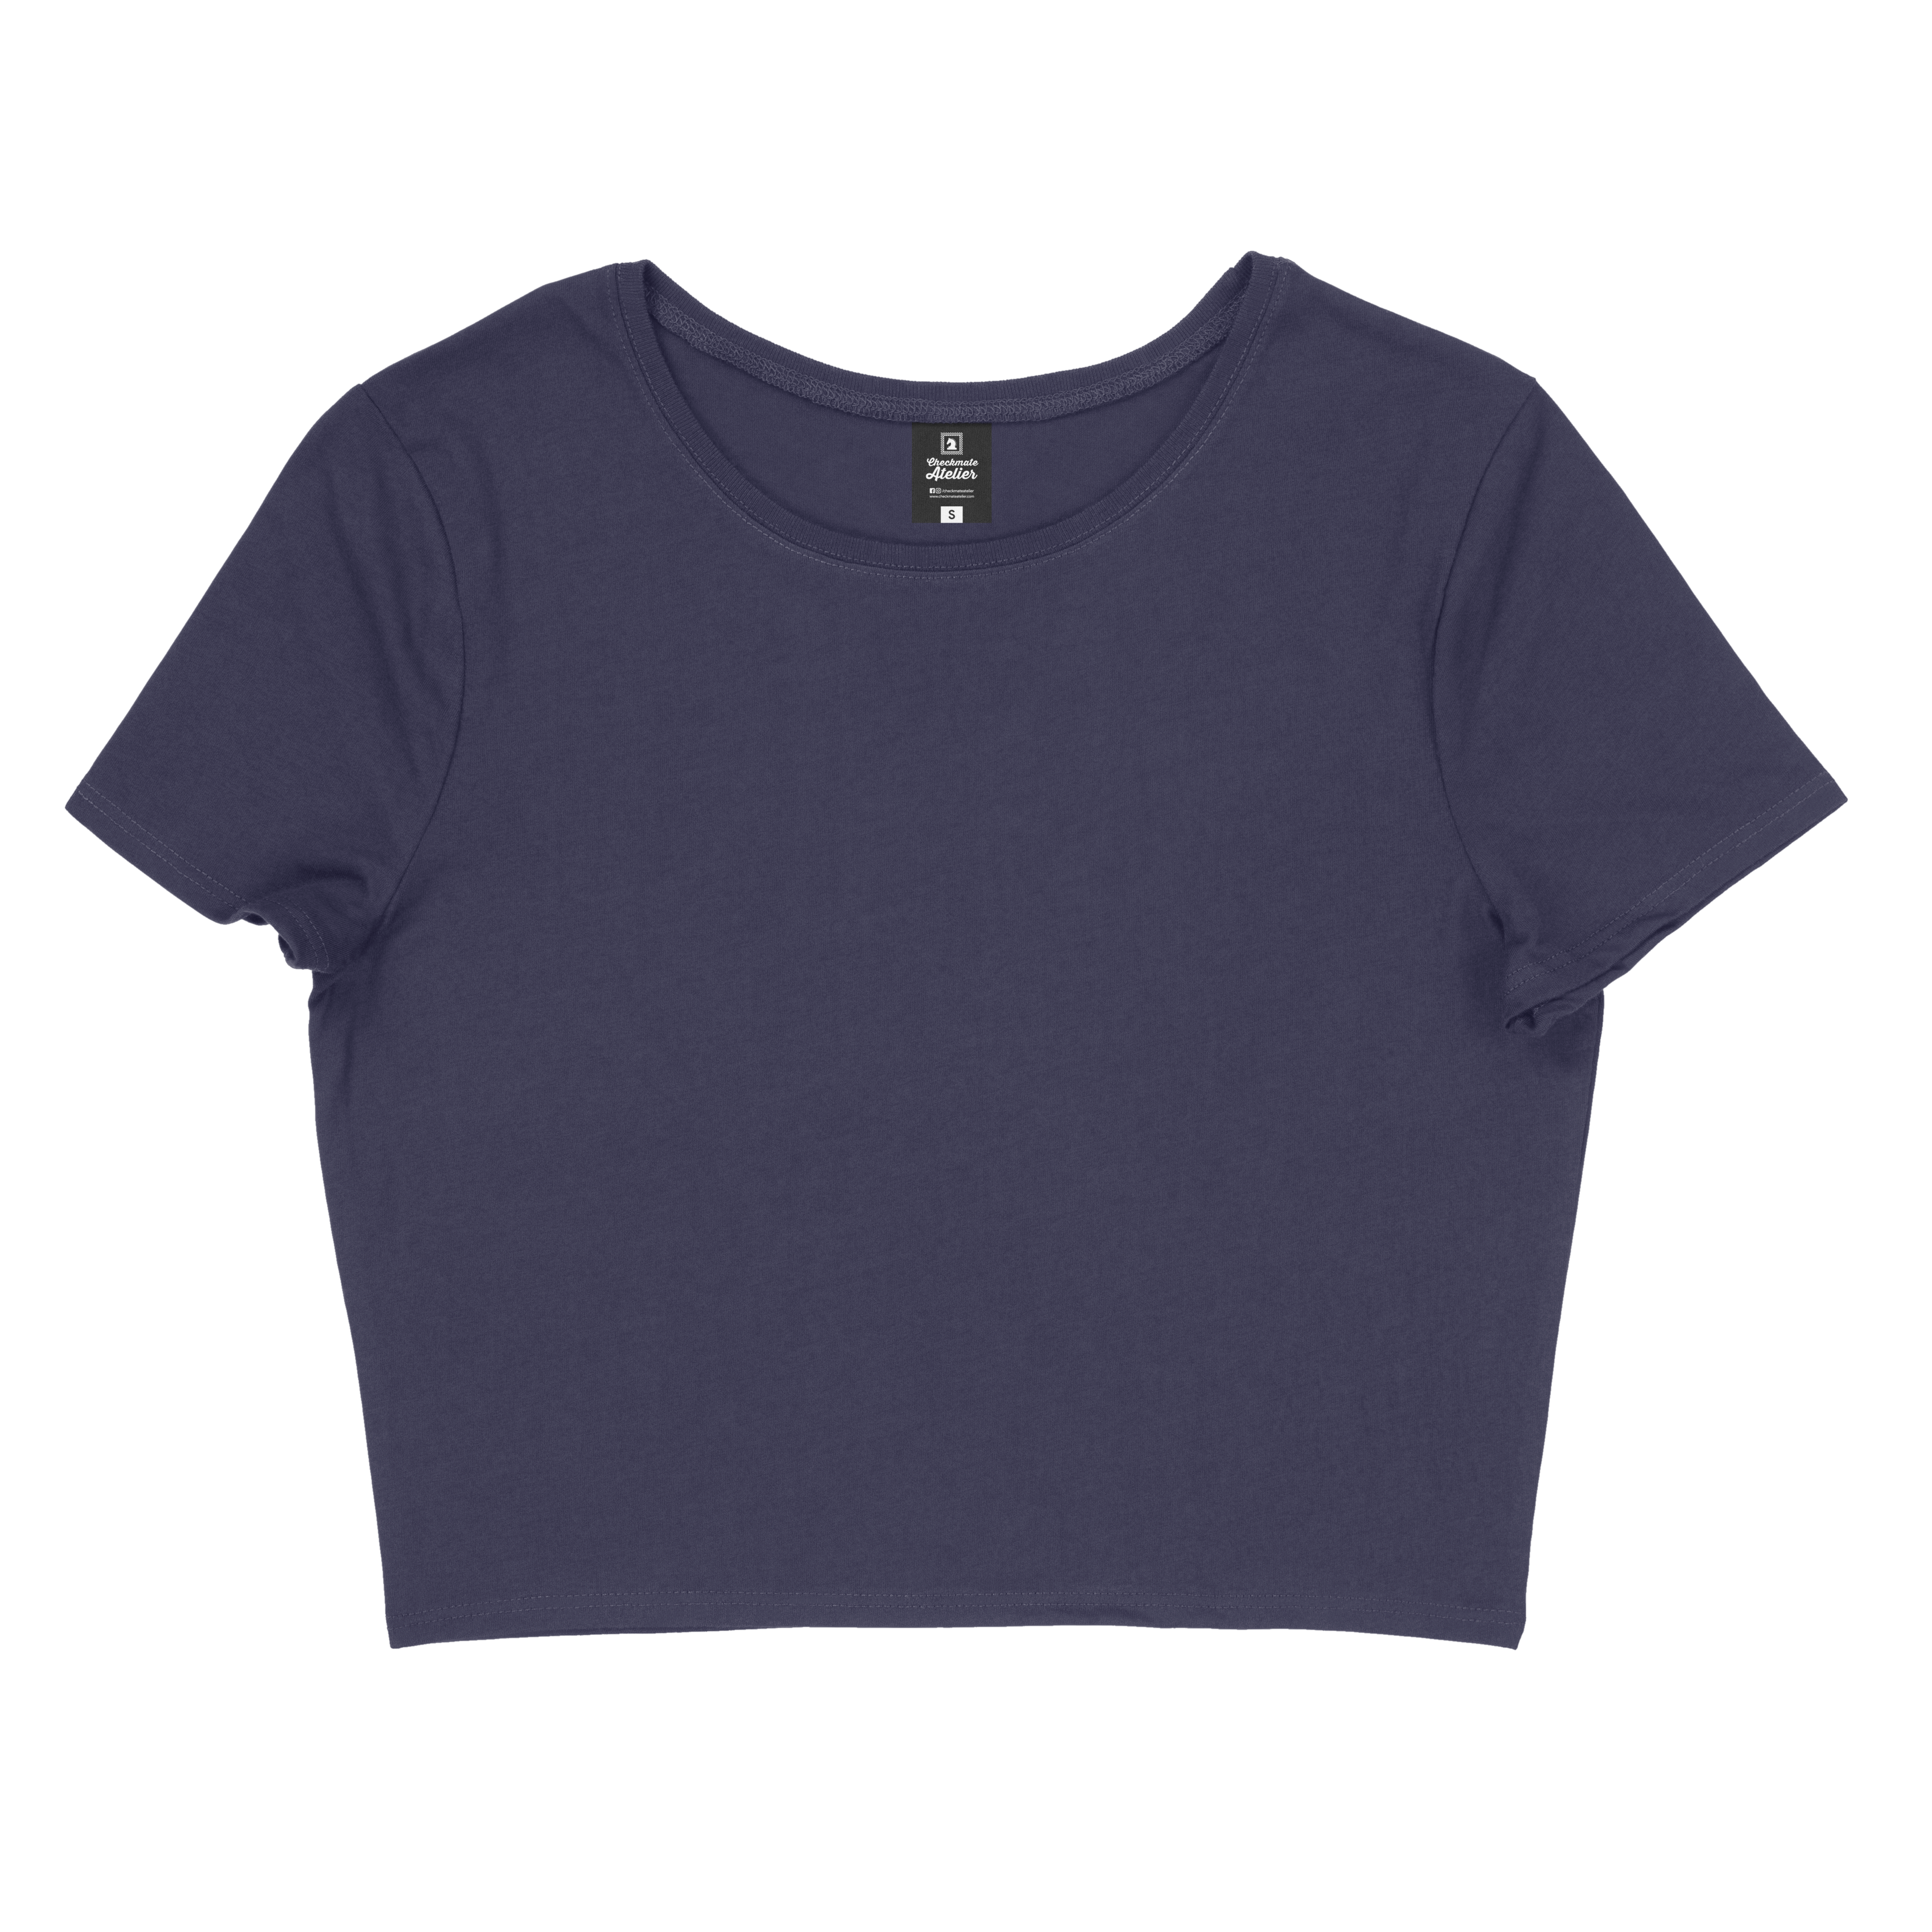 Navy Blue Crop Top - Shop Now - Checkmate Atelier